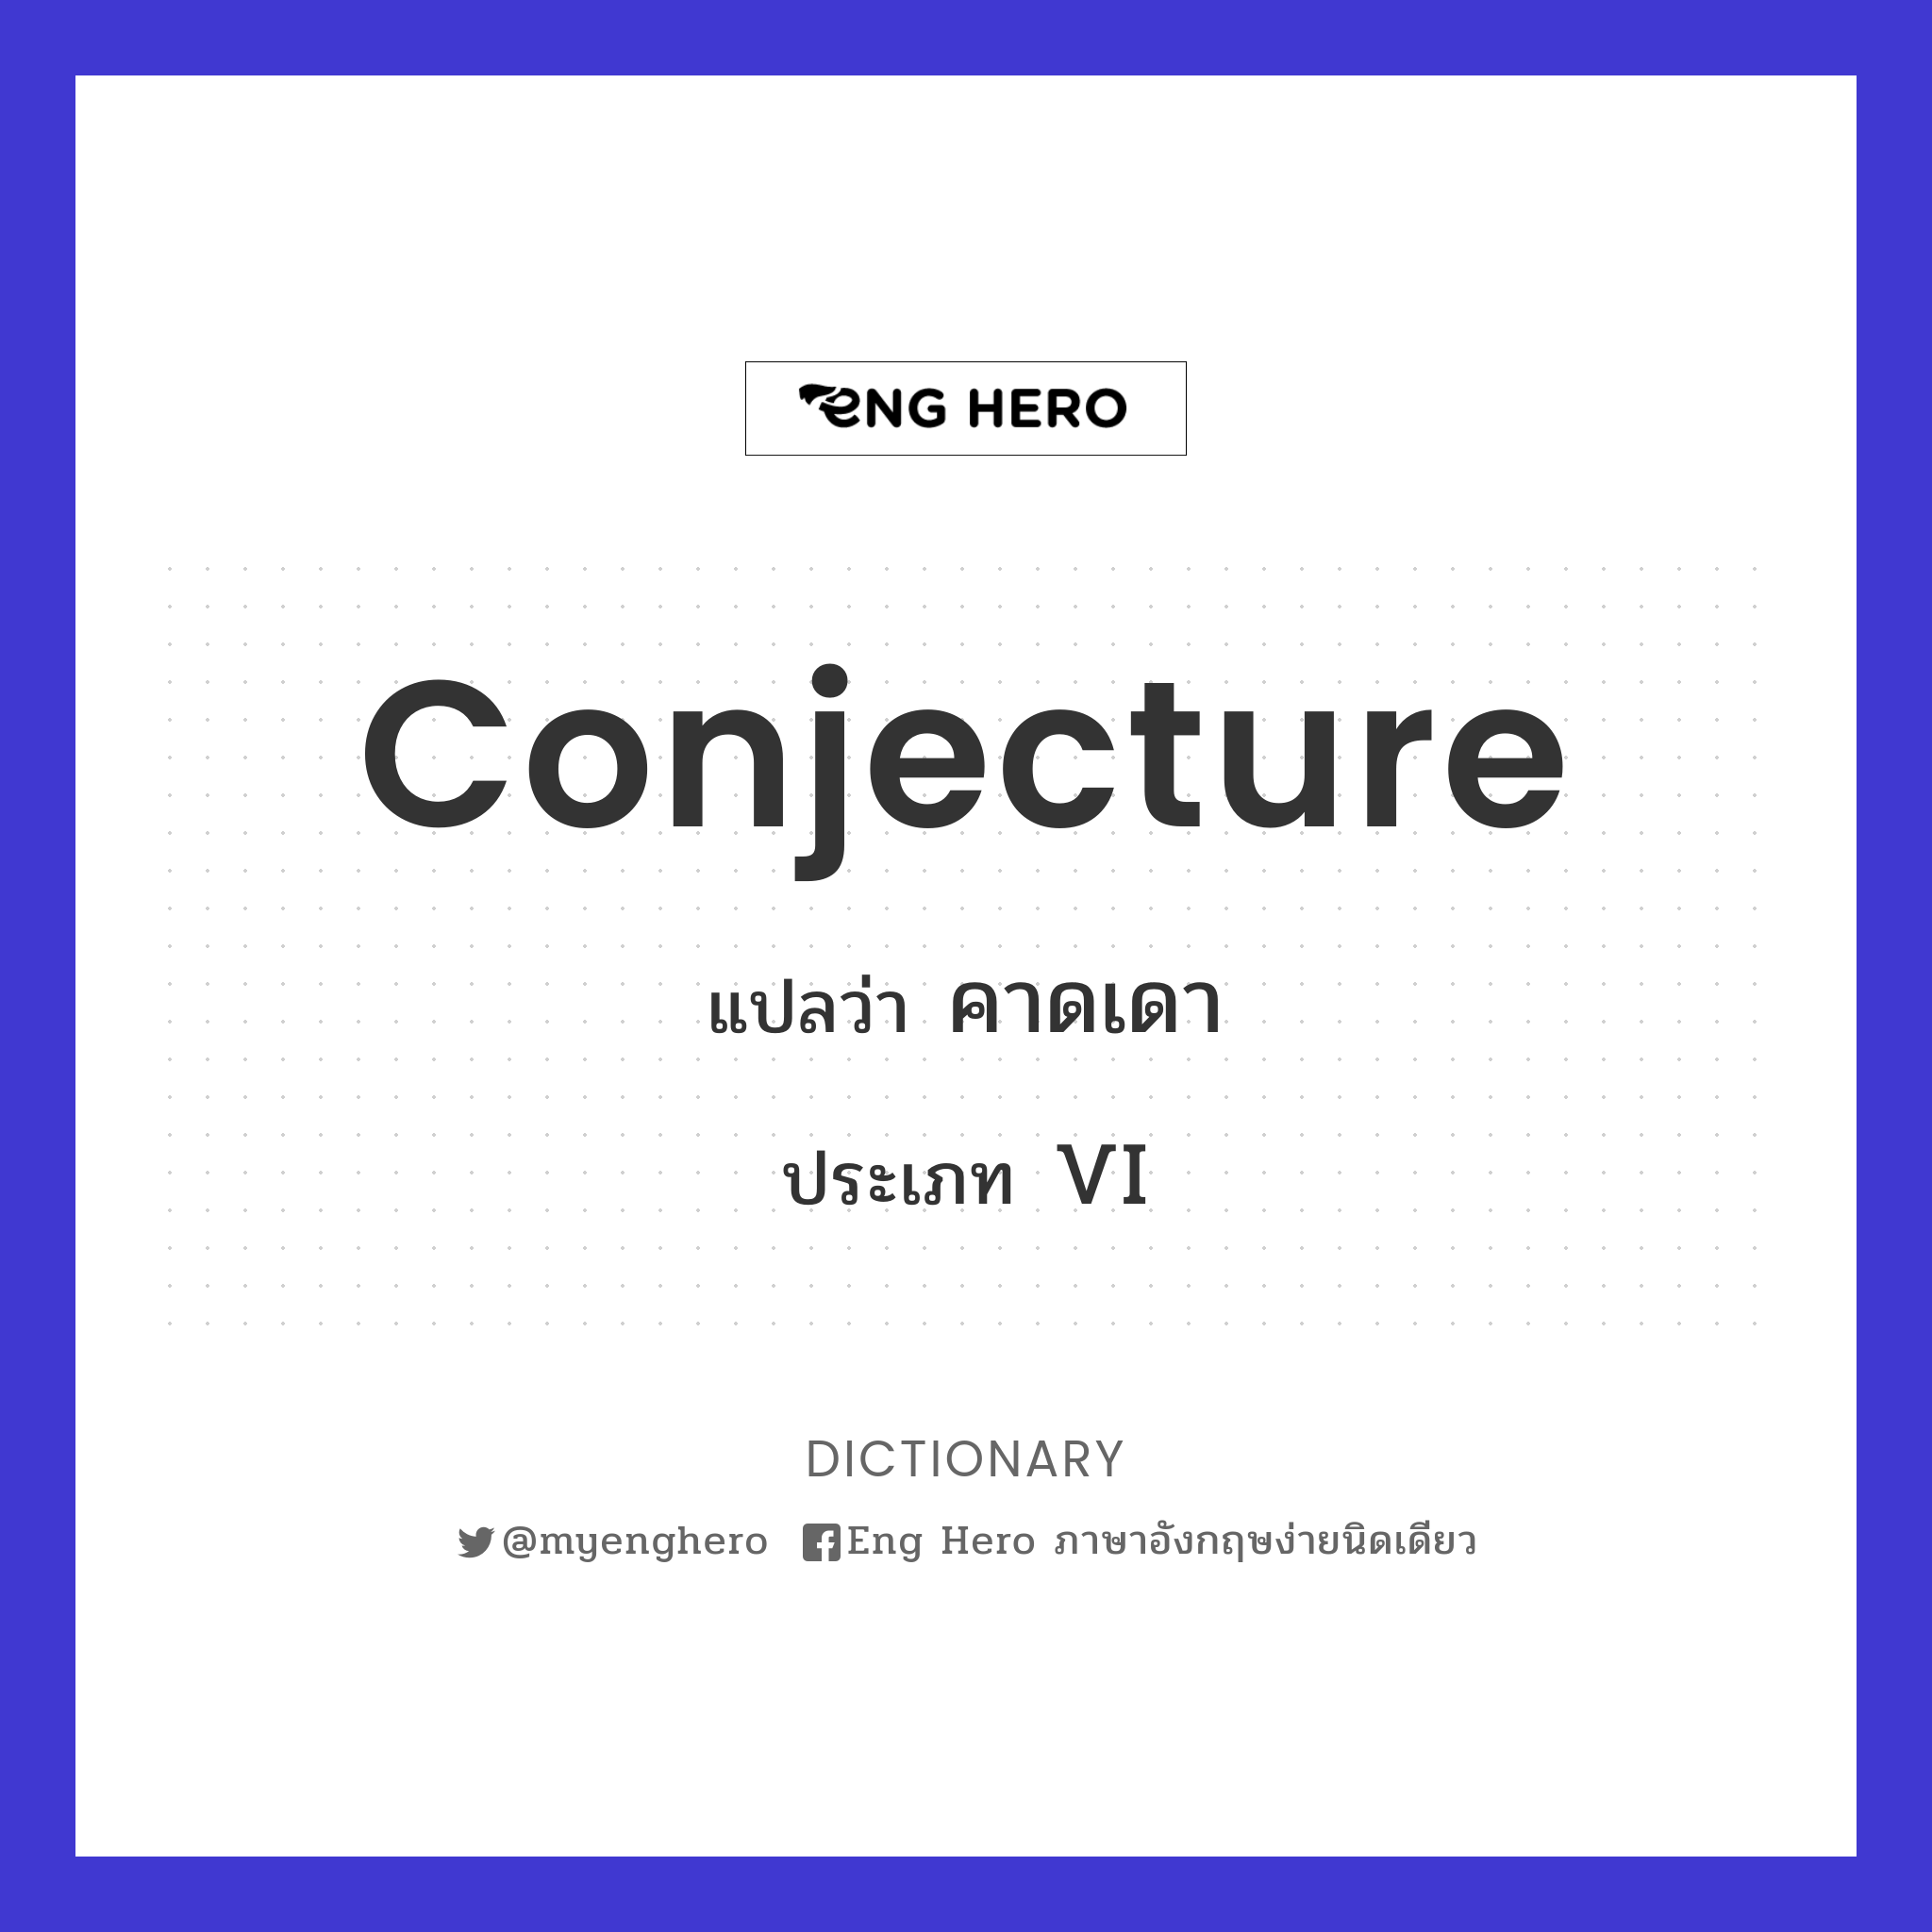 conjecture